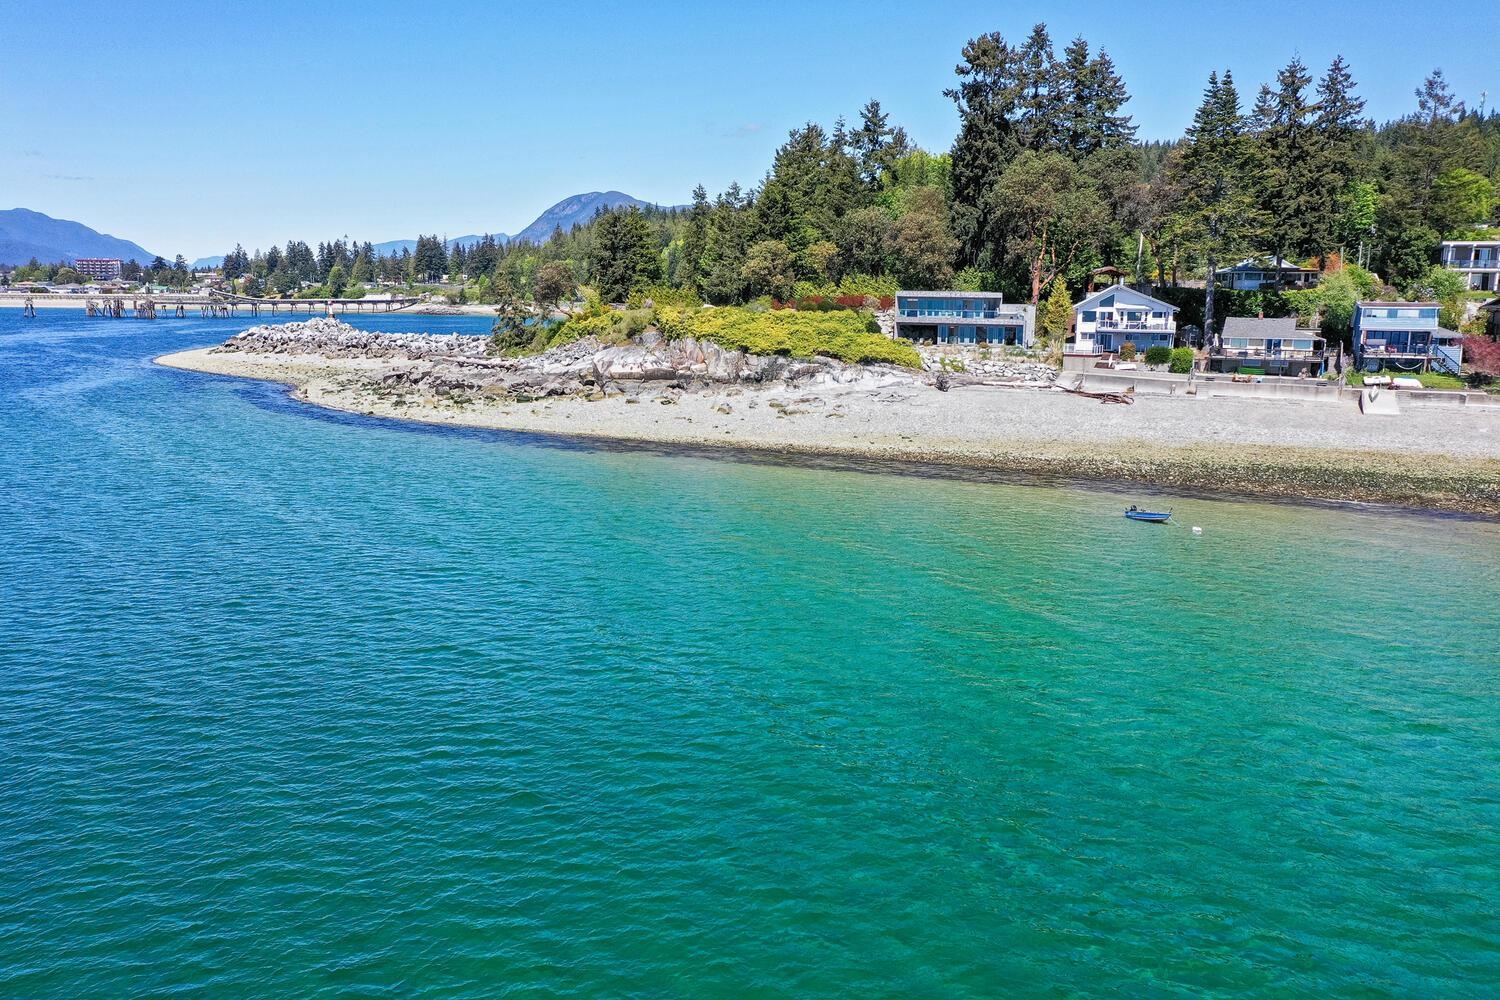 Sechelt District House/Single Family for sale:  2 bedroom 1,316 sq.ft. (Listed 3600-05-19)